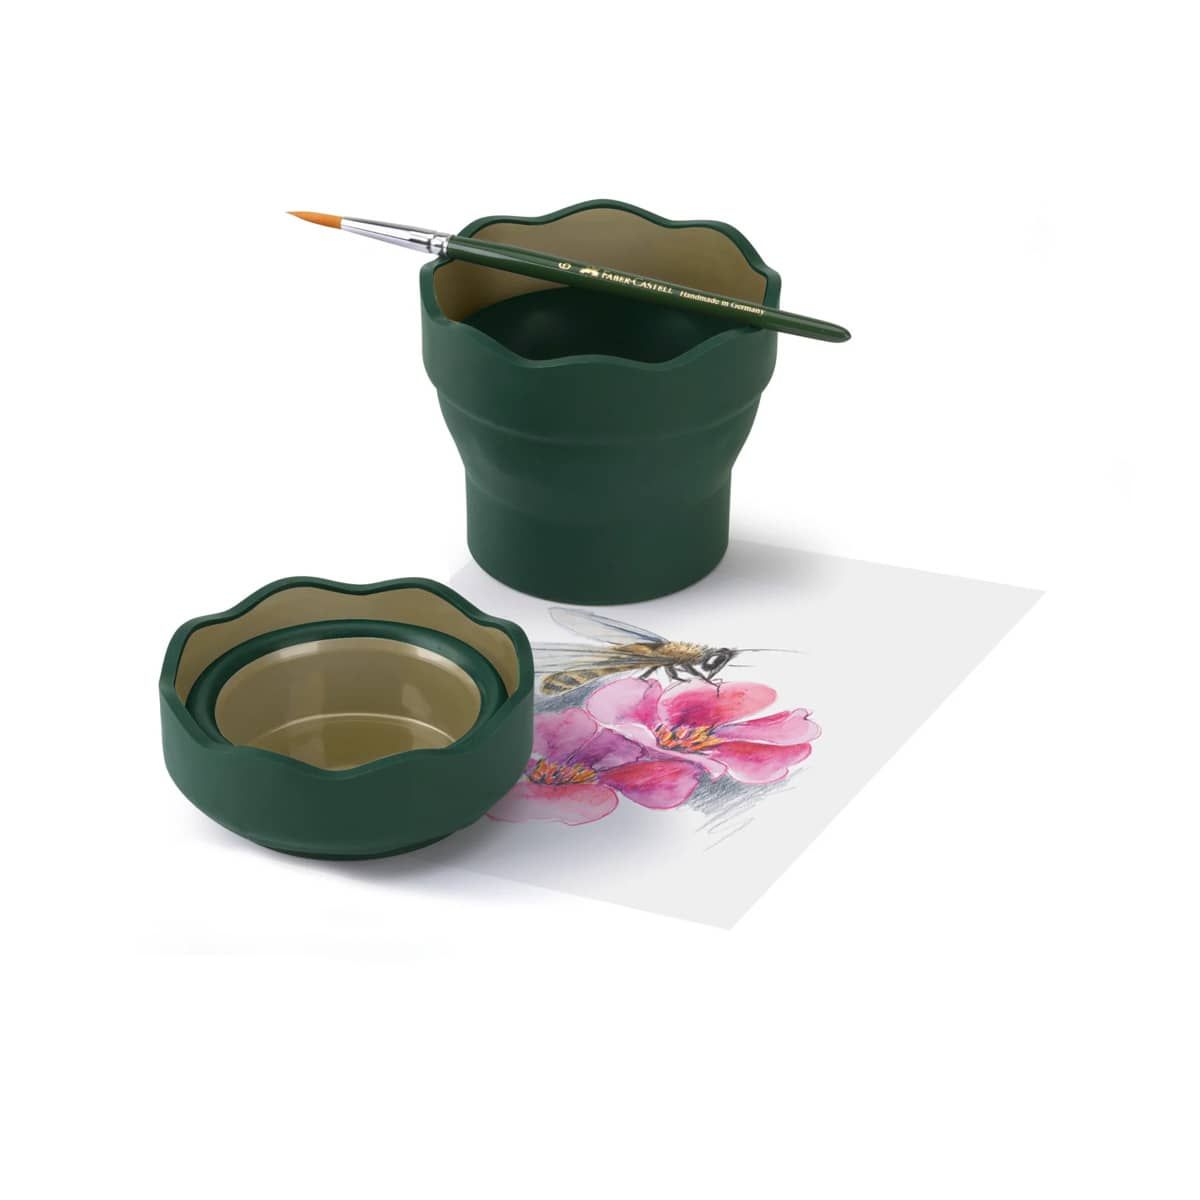 Collapsible water cup holds 12 oz of water and has scalloped edges that will hold your paint brush and prevent it from rolling off the cup between uses!